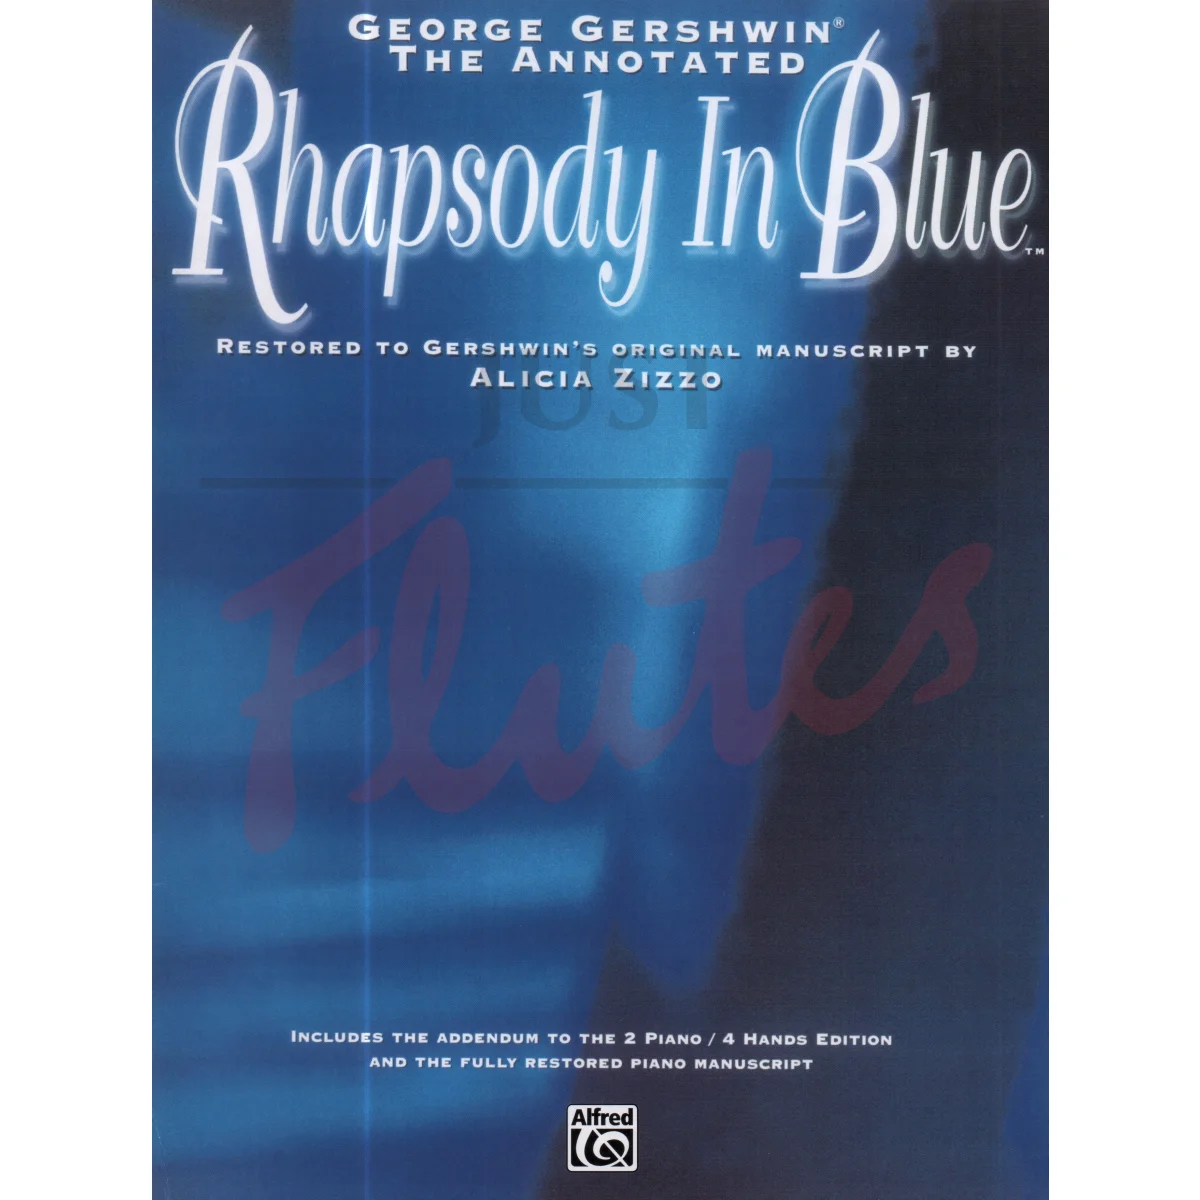 The Annotated Rhapsody In Blue for Piano